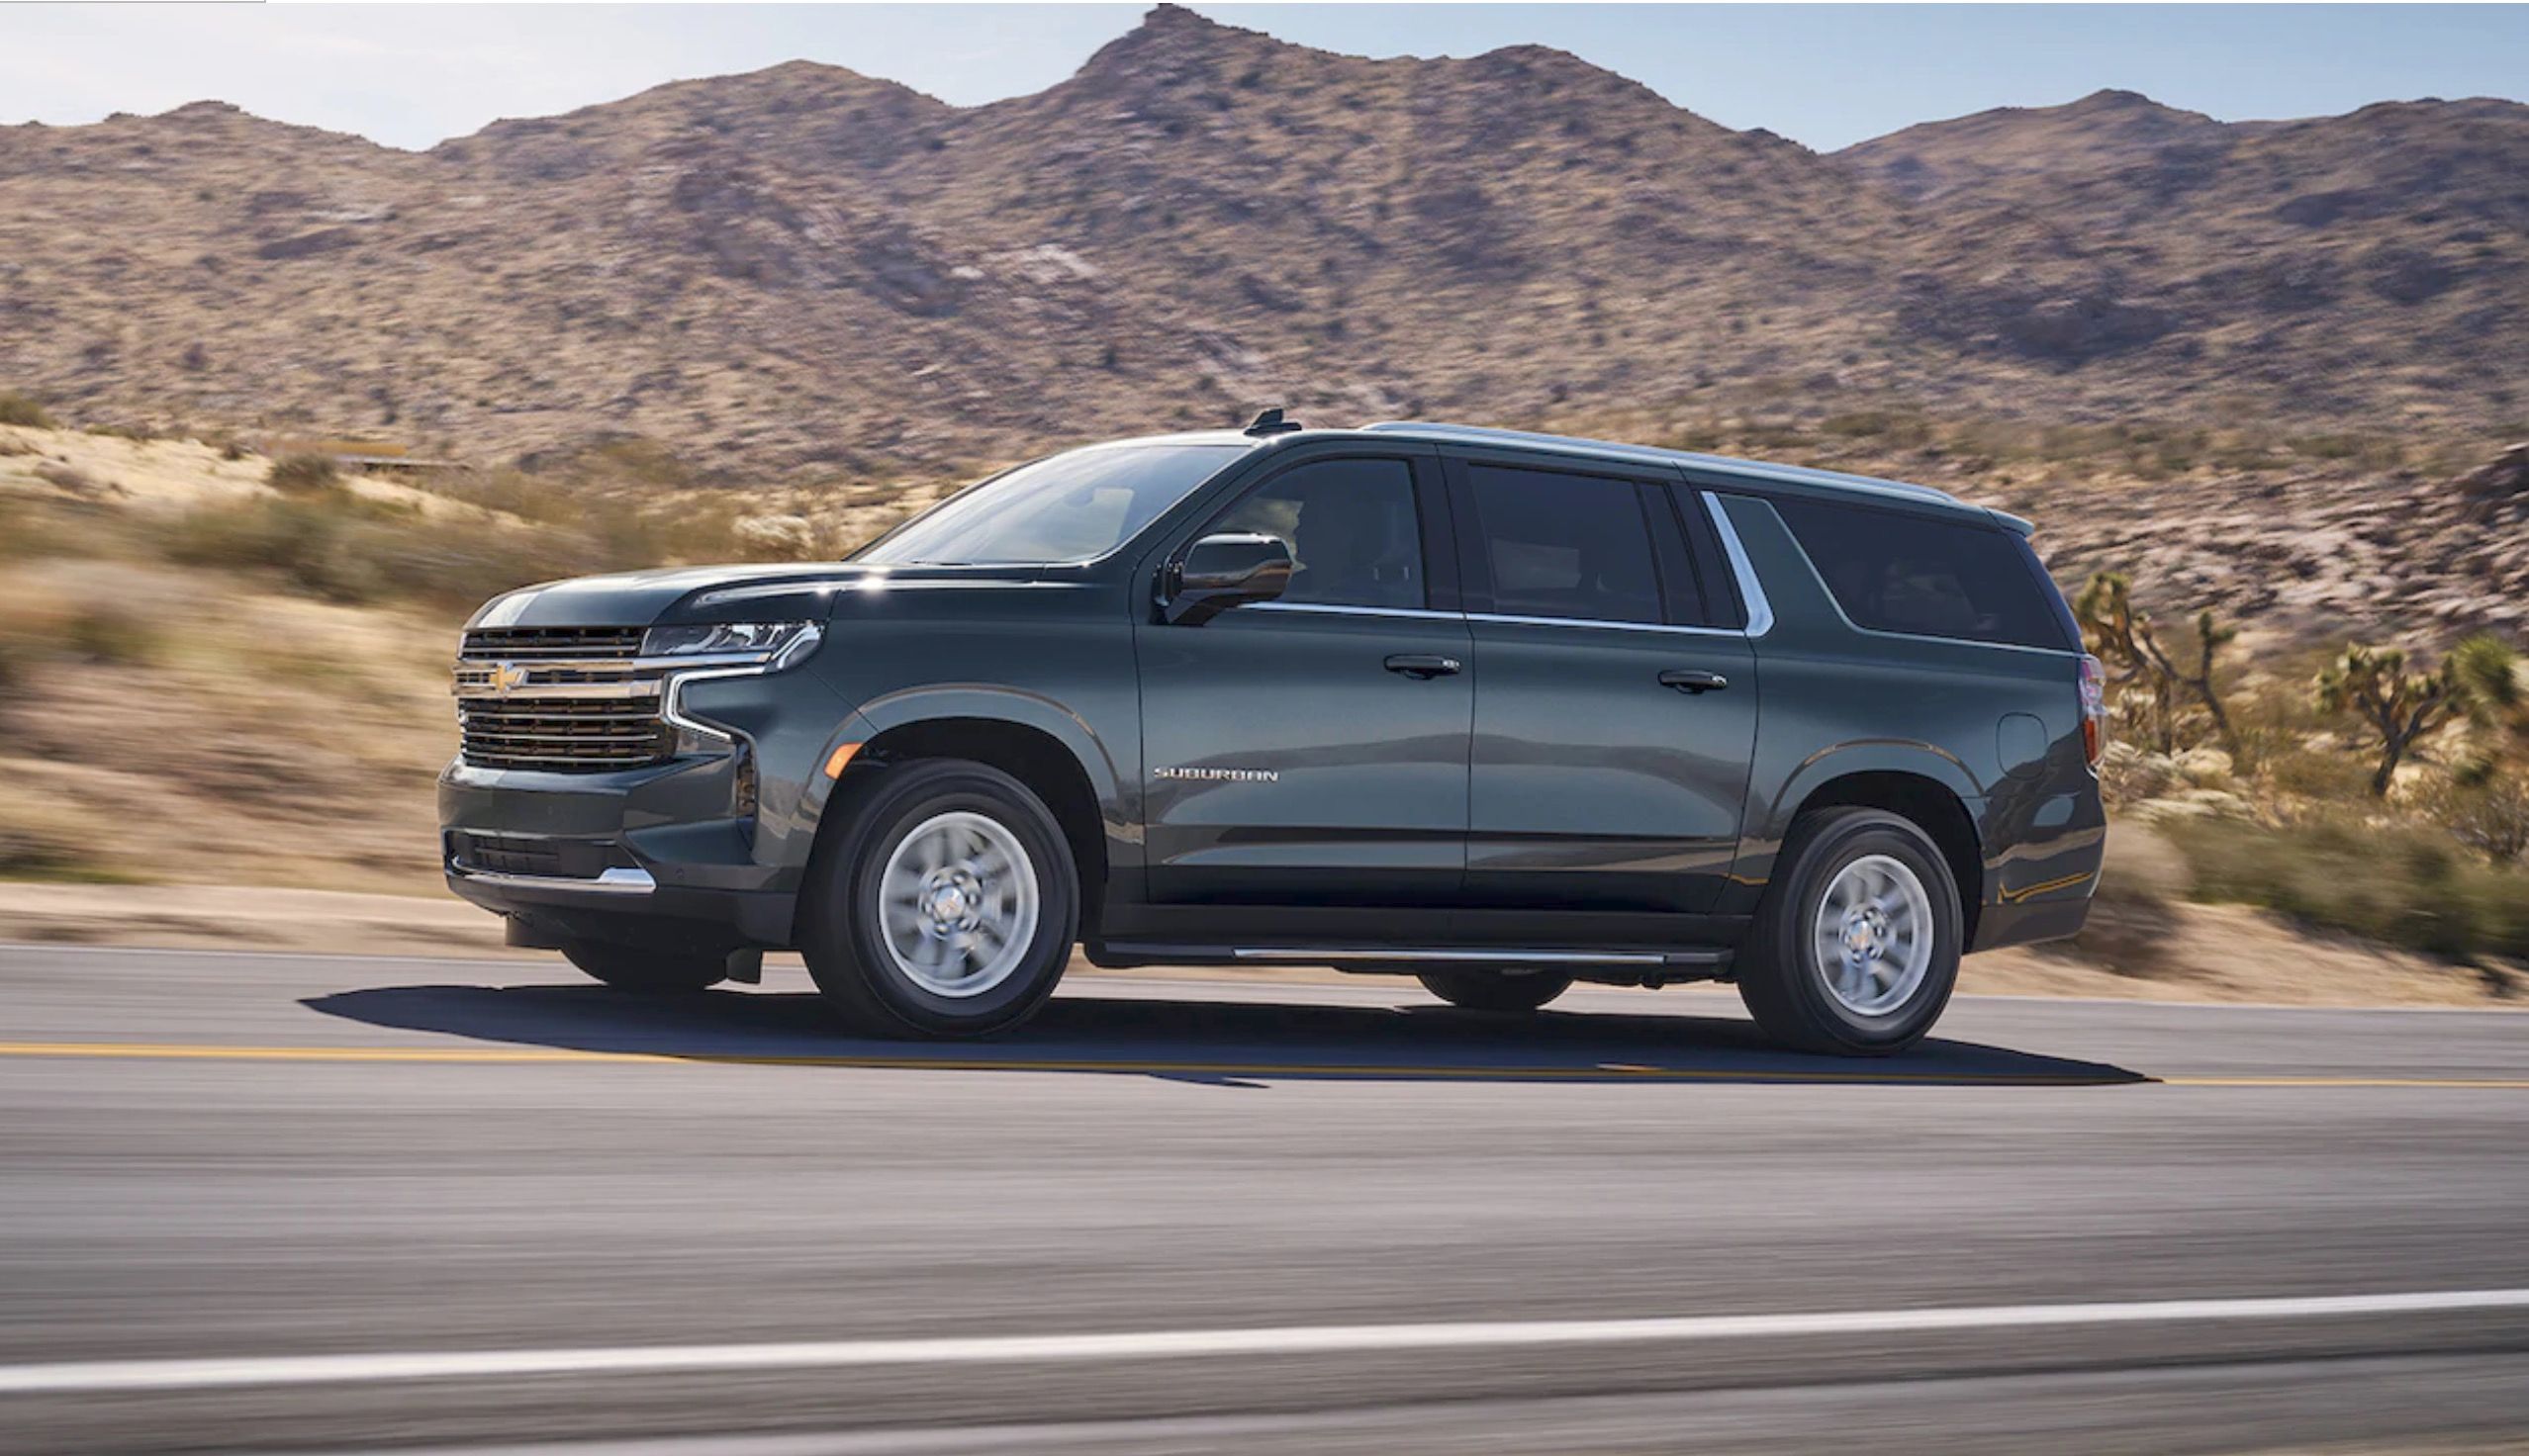 Chevrolet Suburban SUV Sport Utility Vehicle Truck Costs Facts Figures Specifications 2021